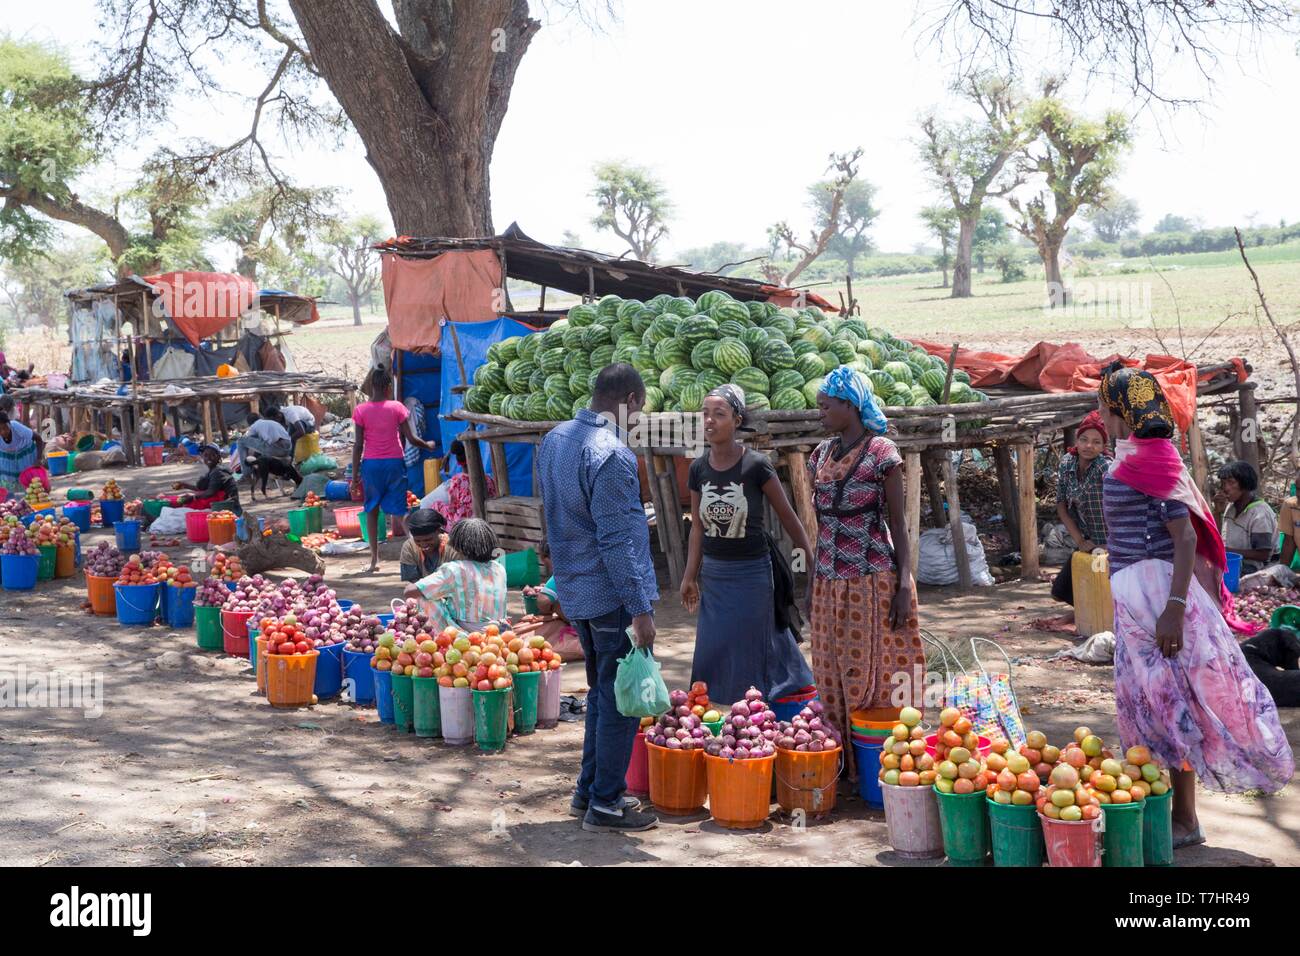 Ethiopia, Rift Valley, Ziway, Ziway lake, sale of vegetables (tomatoes and onions) at the edge of the road Stock Photo